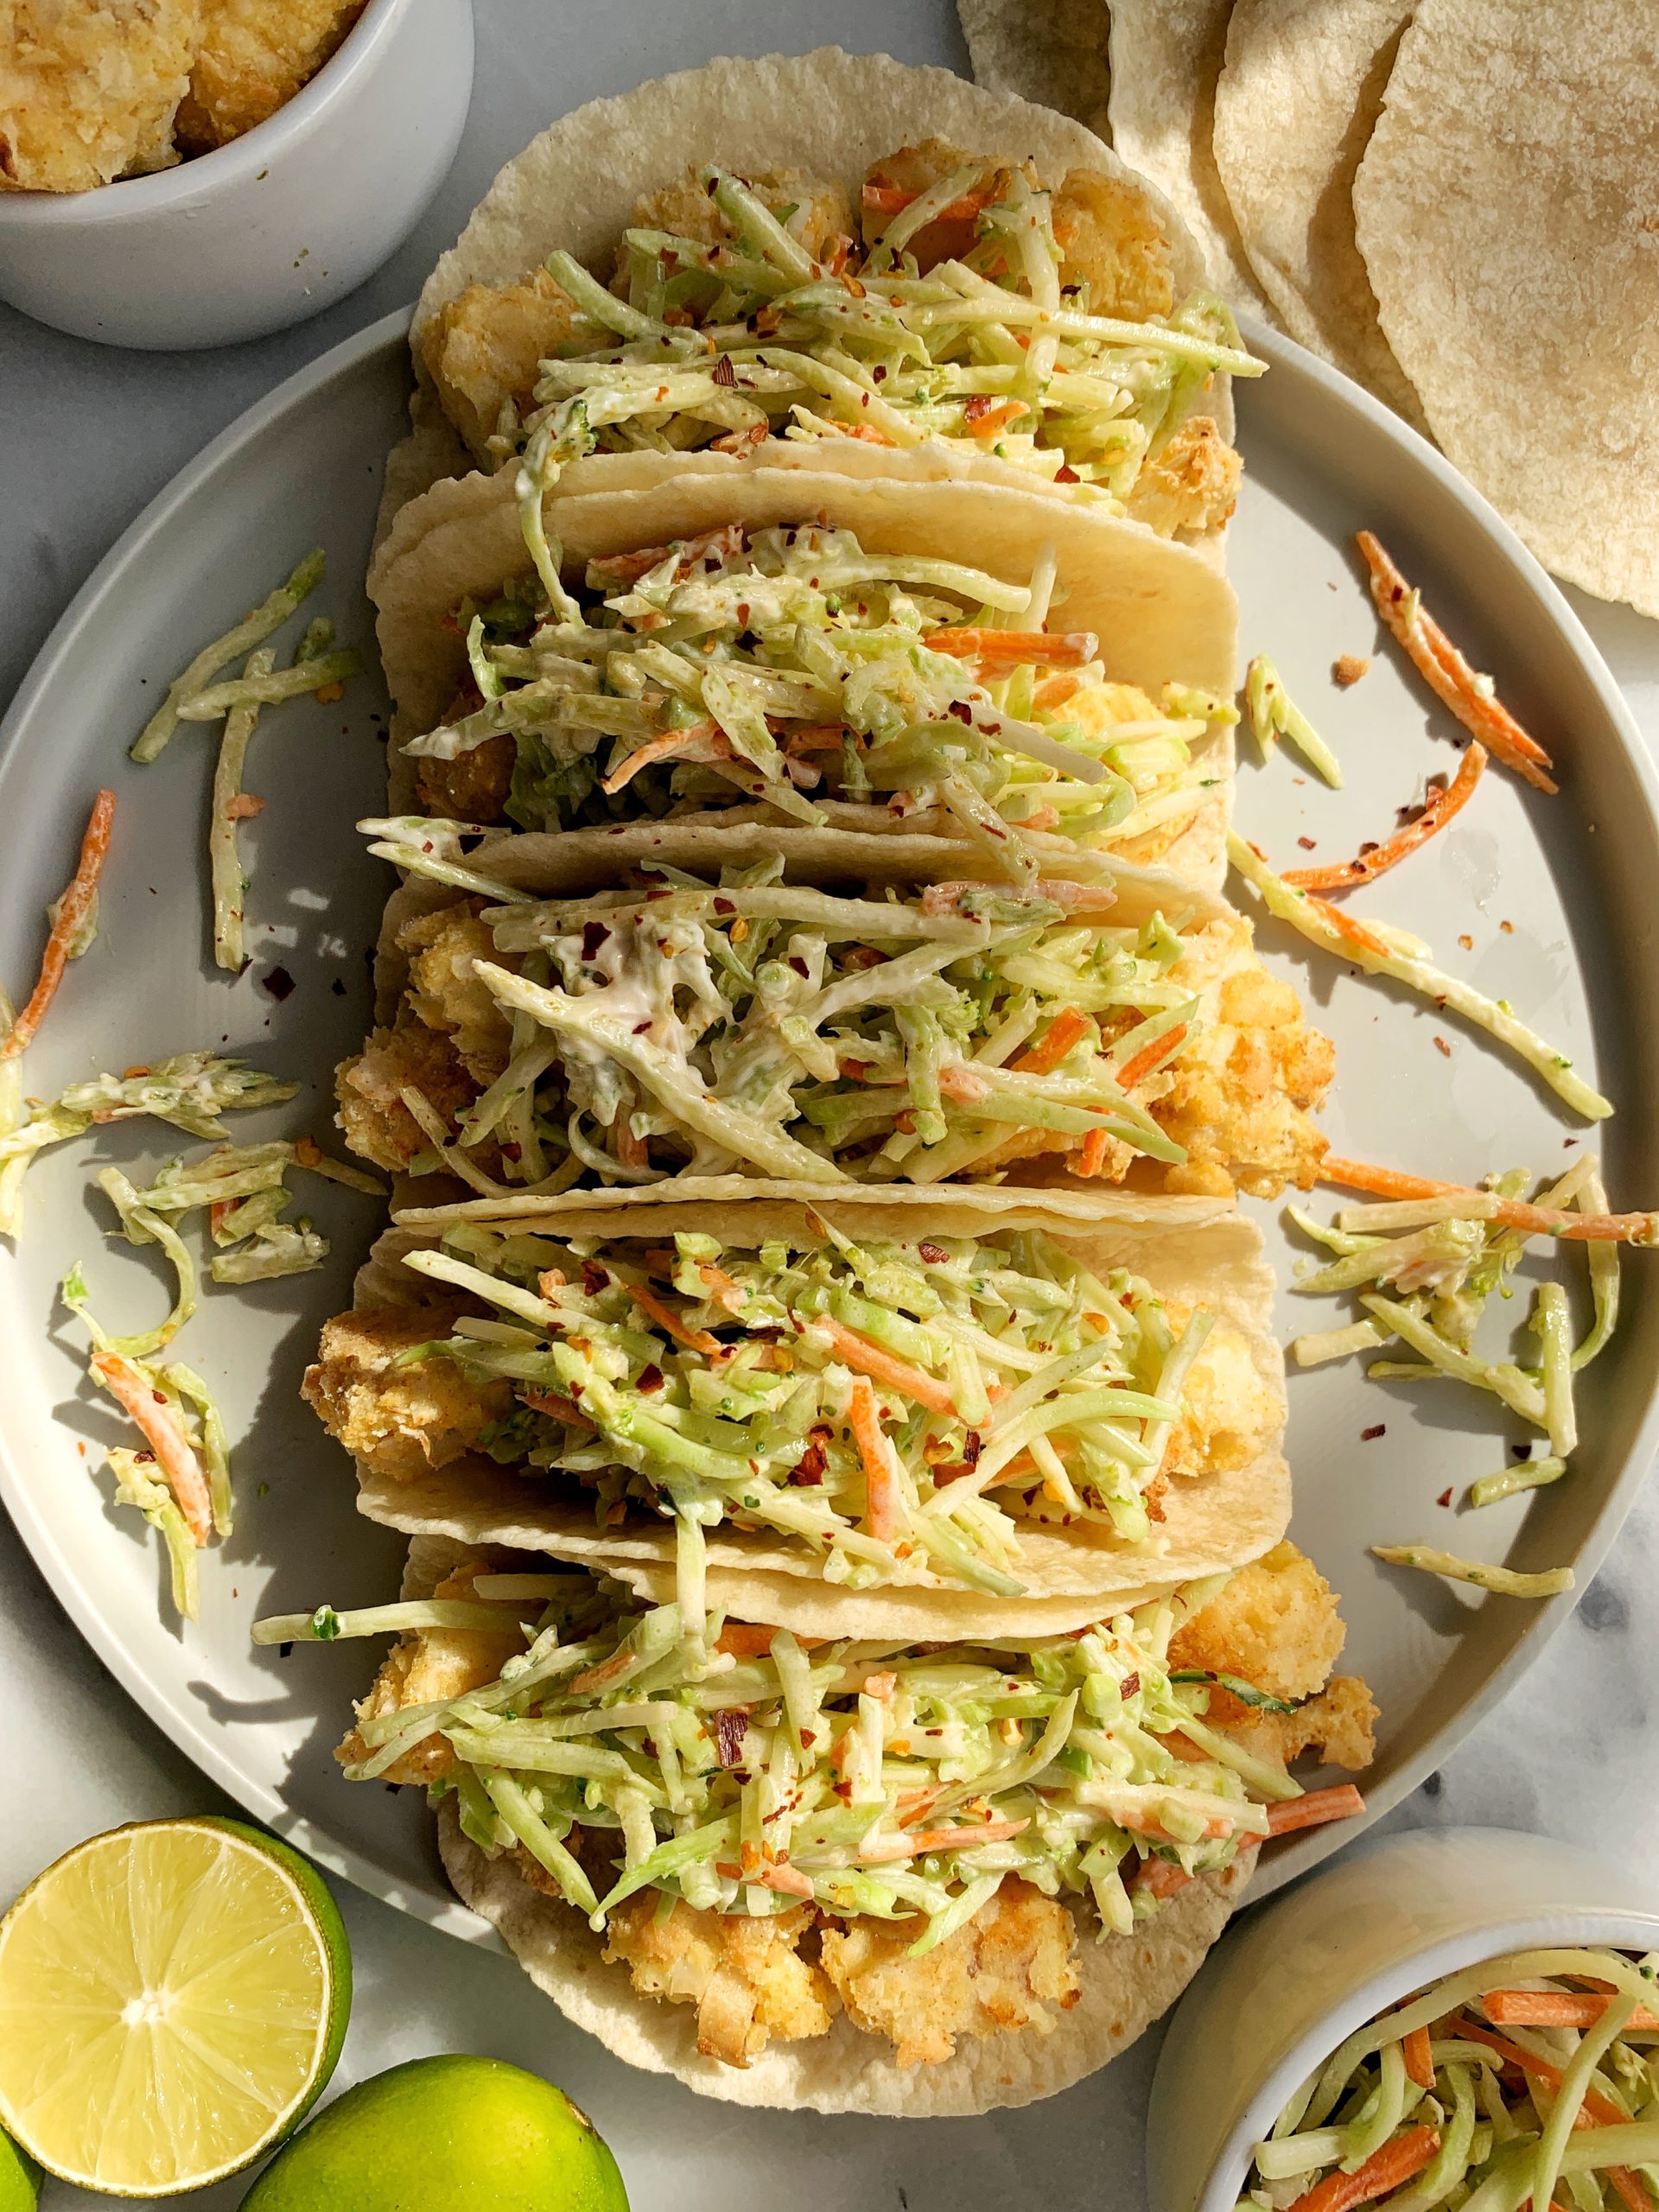 The Best Crispy Oven-Baked Paleo Fish Tacos - rachLmansfield